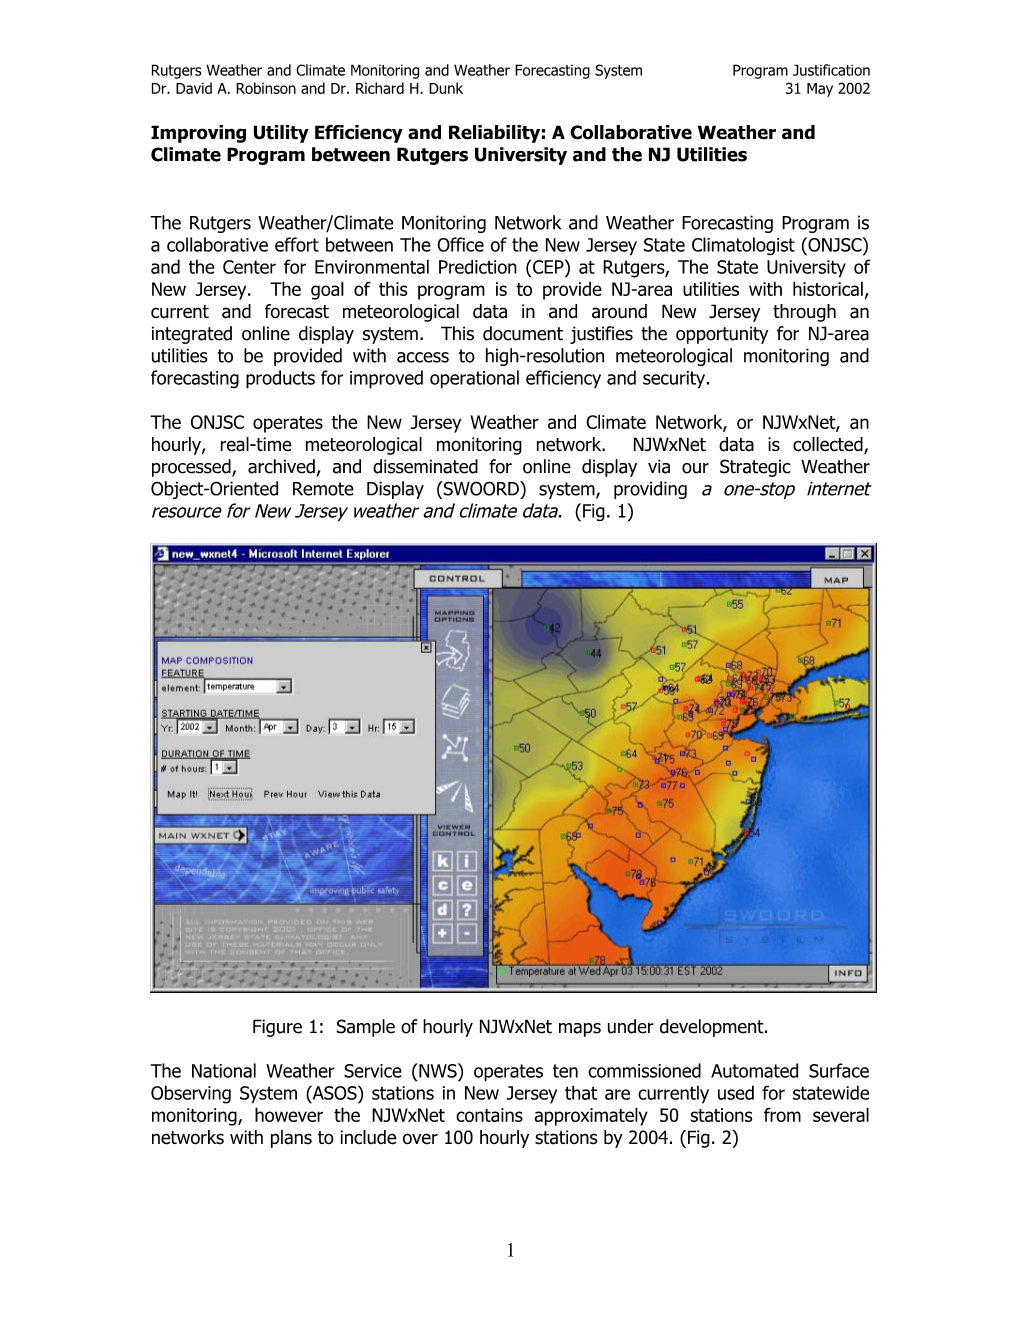 An Advanced Weather/Climate Monitoring and Forecasting System